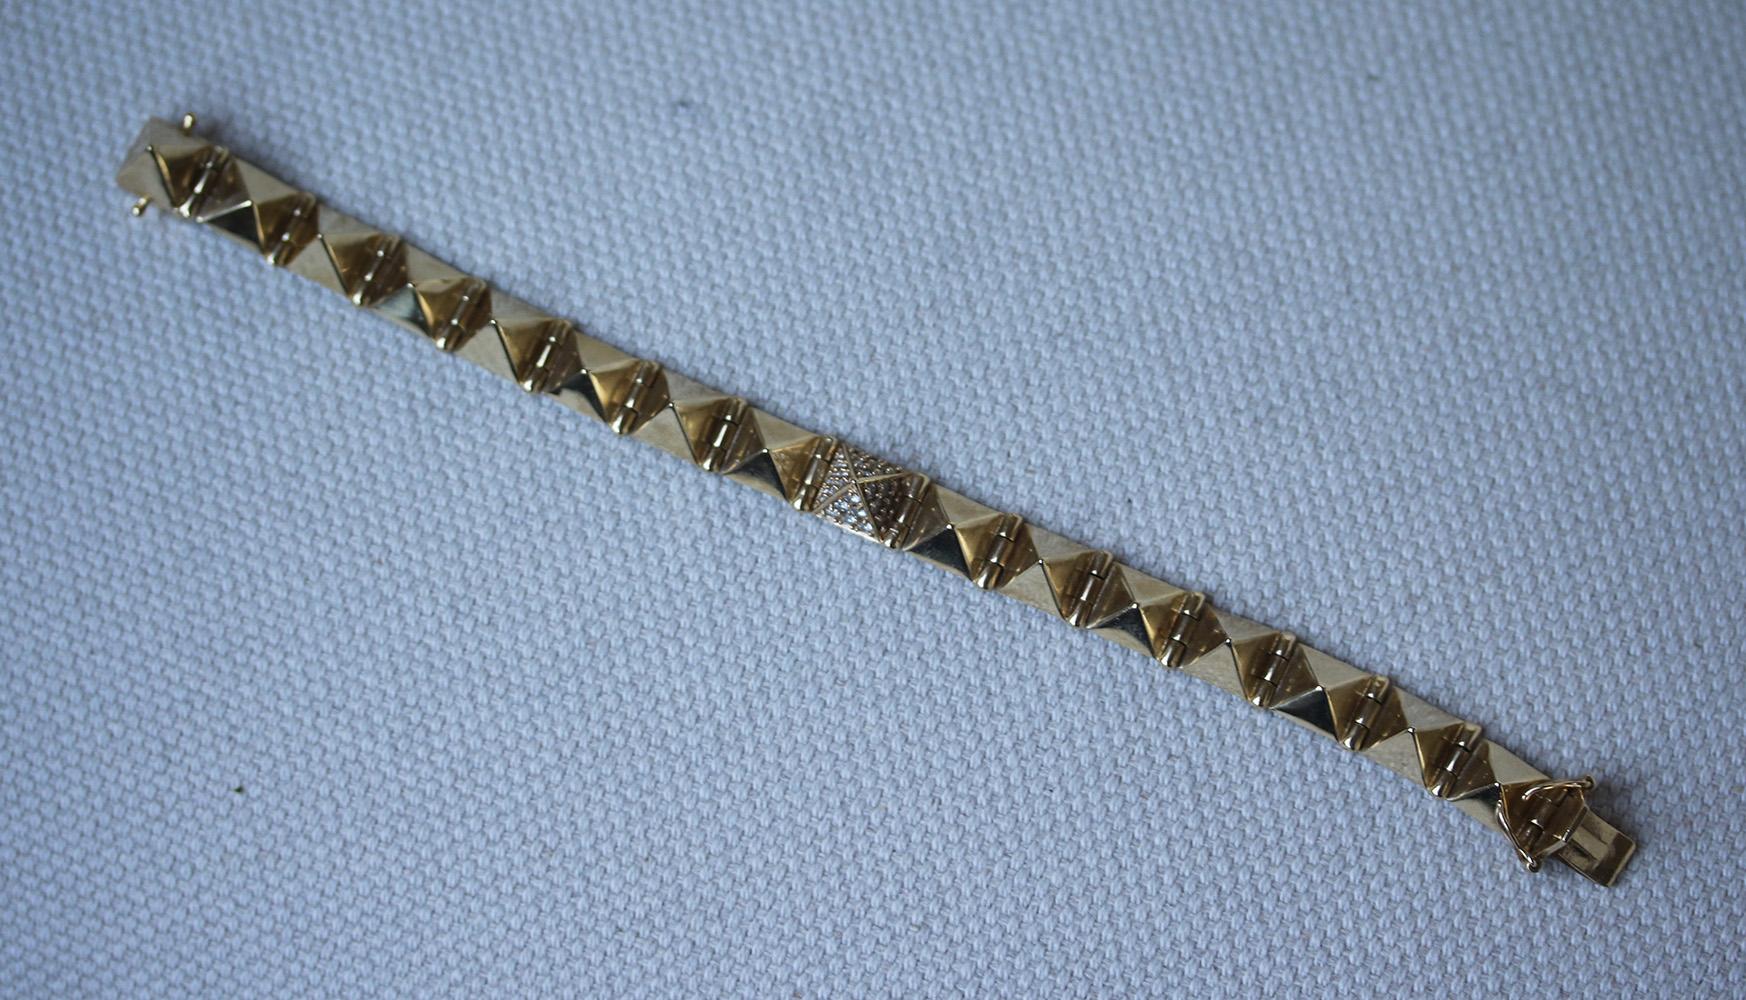 Anita Ko 14ct yellow gold spike bracelet with one diamond spike. 0.25cts Diamonds.

Dimensions: Length - 17.5 cm 
Width - 0.7 cm

Condition: No sign of wear. Does not come with its box.
